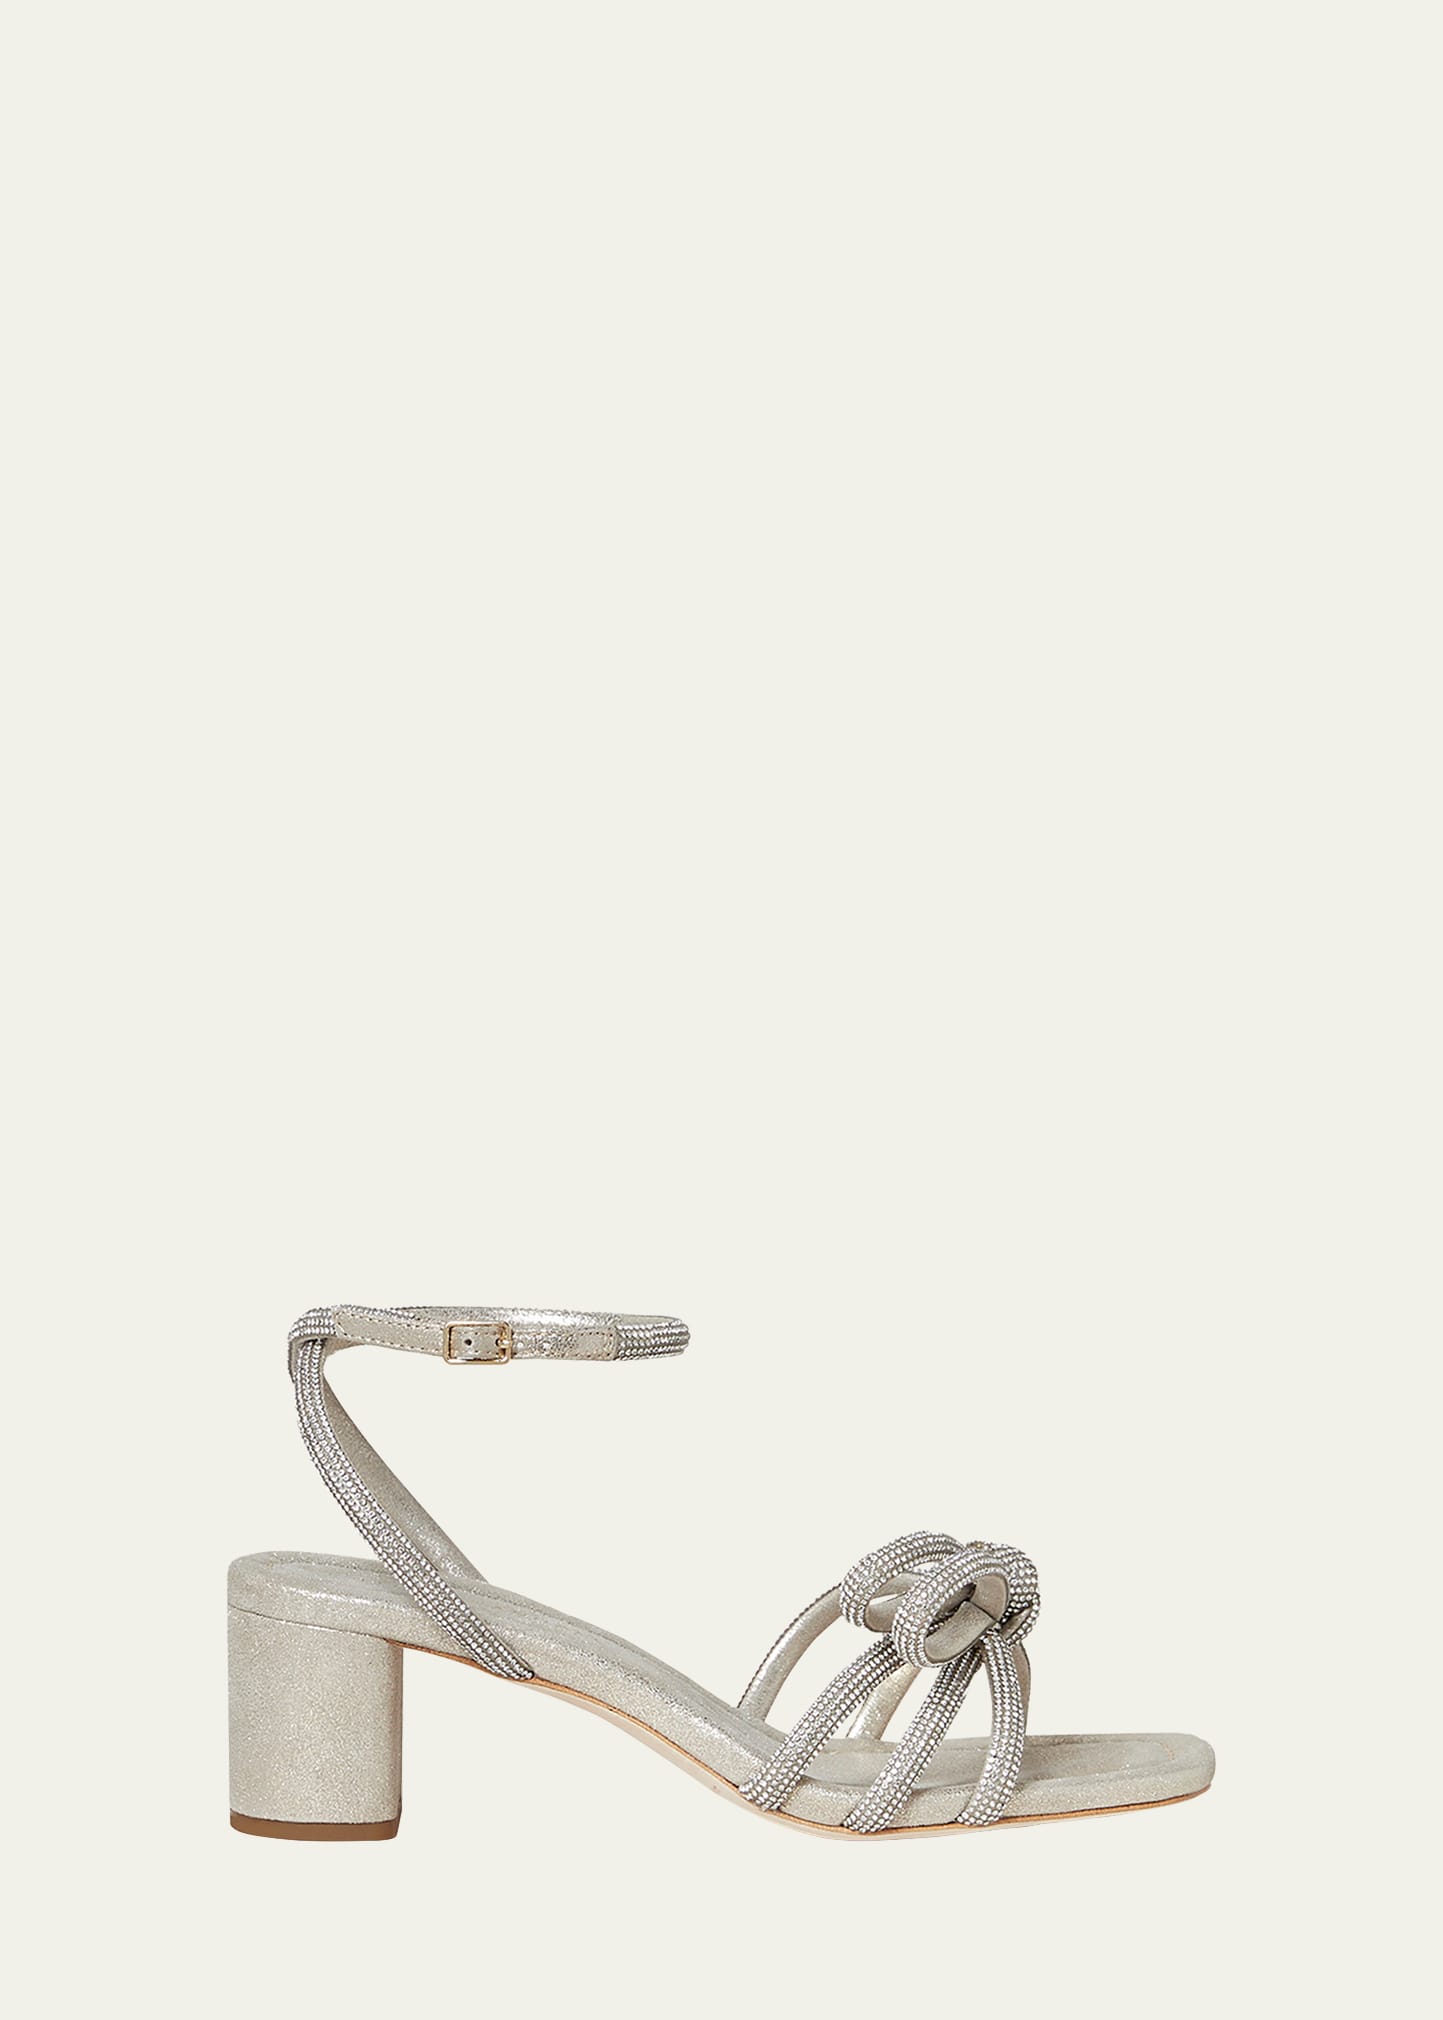 Mikel Strass Bow Ankle-Strap Sandals